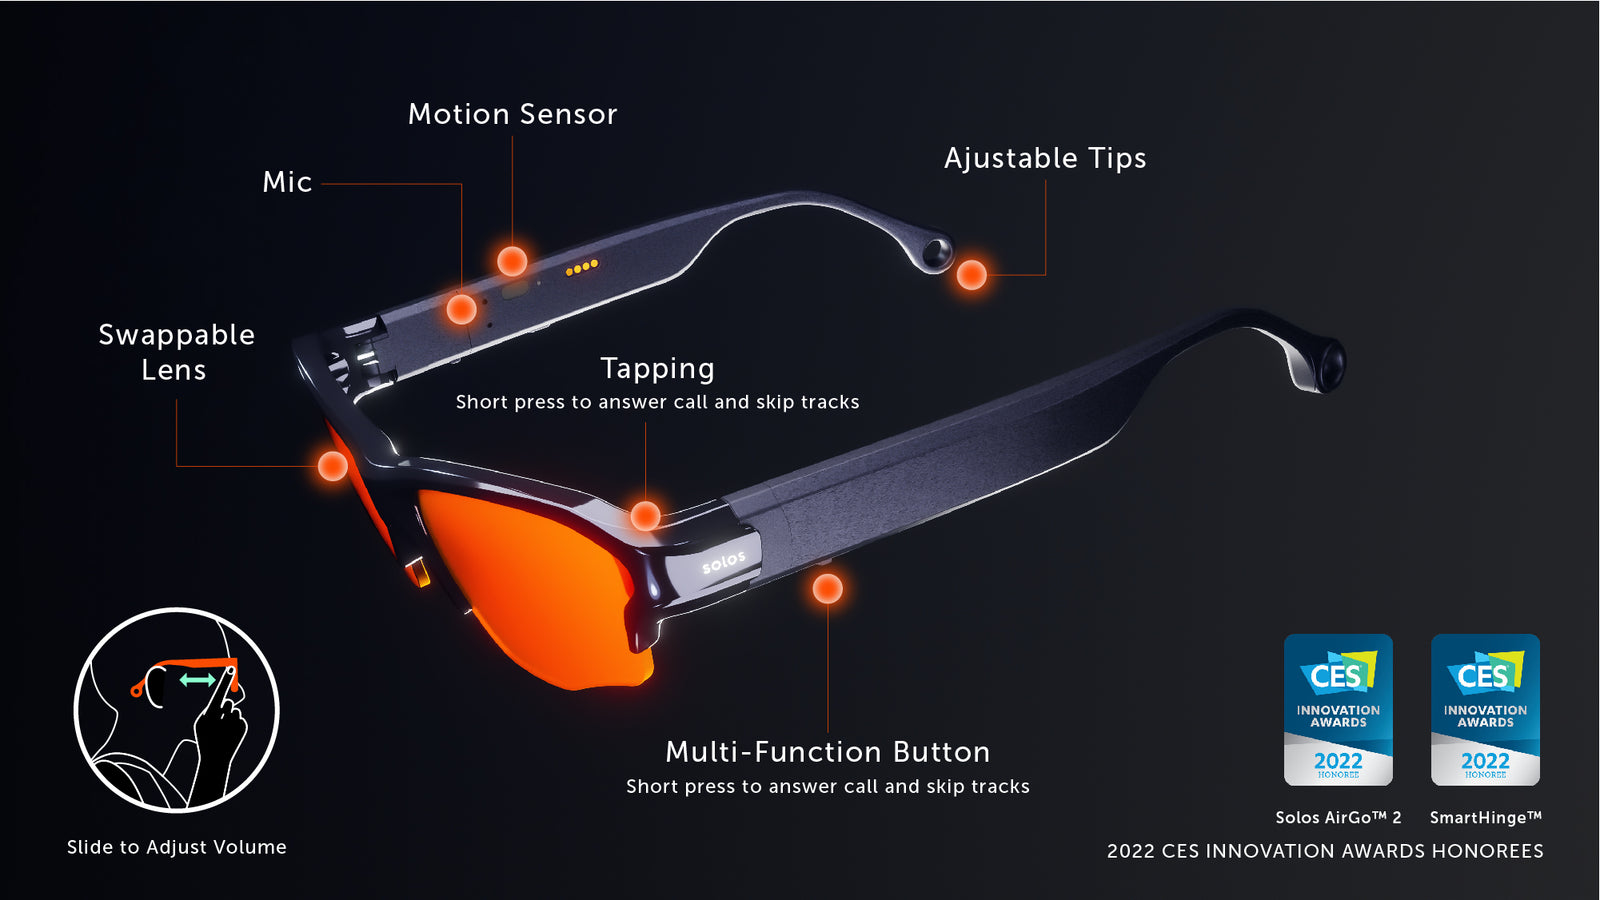 Smart Glasses | How Solos Smart Glasses Have Changed the Way I Use My Smartphone - Solos Technology Limited